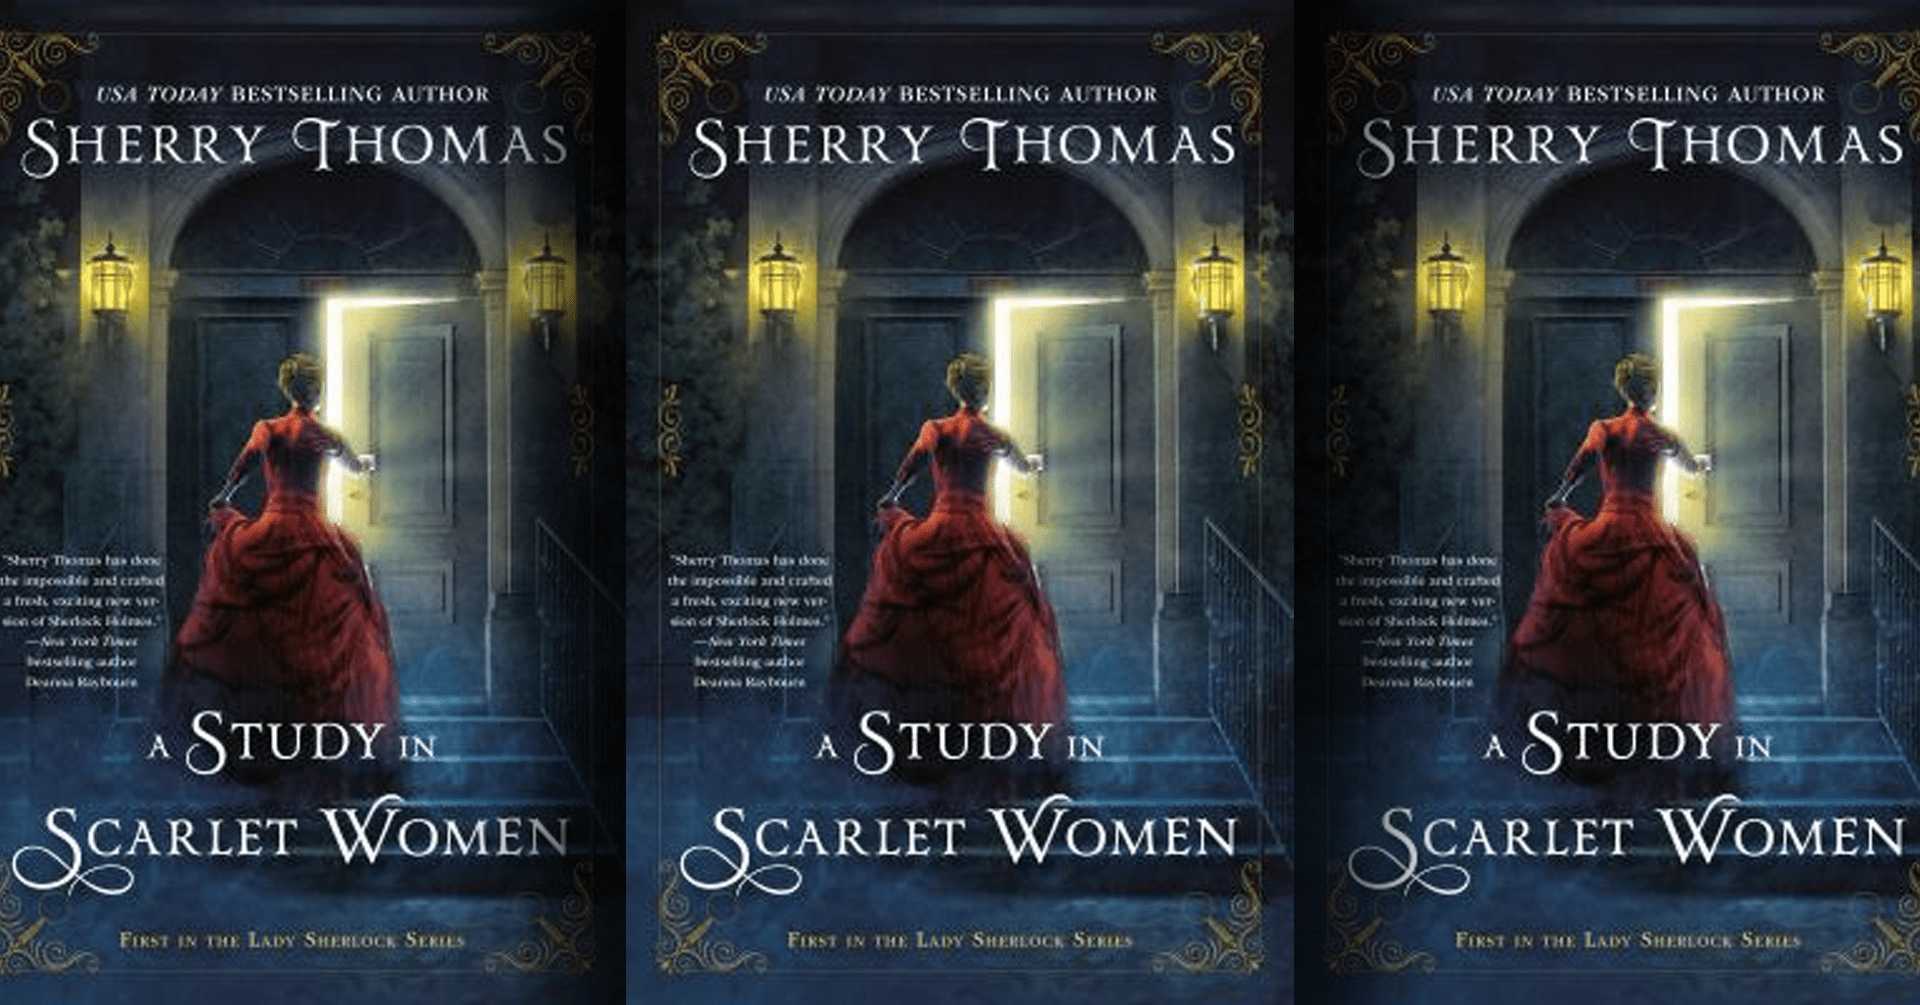 A Study in Scarlet Women by Sherry Thomas (book cover)